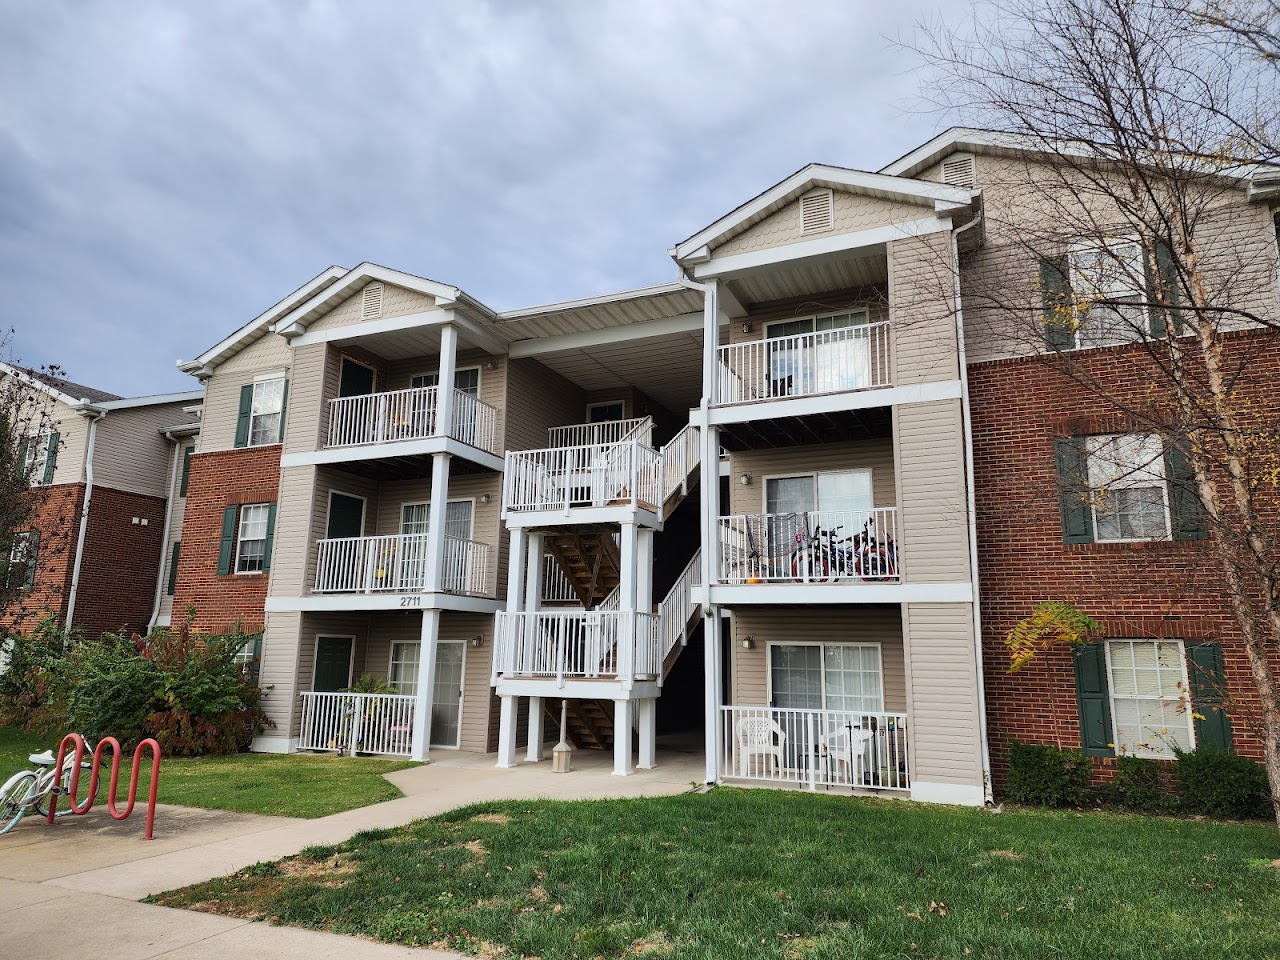 Photo of WINDHAM TERRACE APTS. Affordable housing located at 2701 WINDHAM TER DR WOOD RIVER, IL 62095